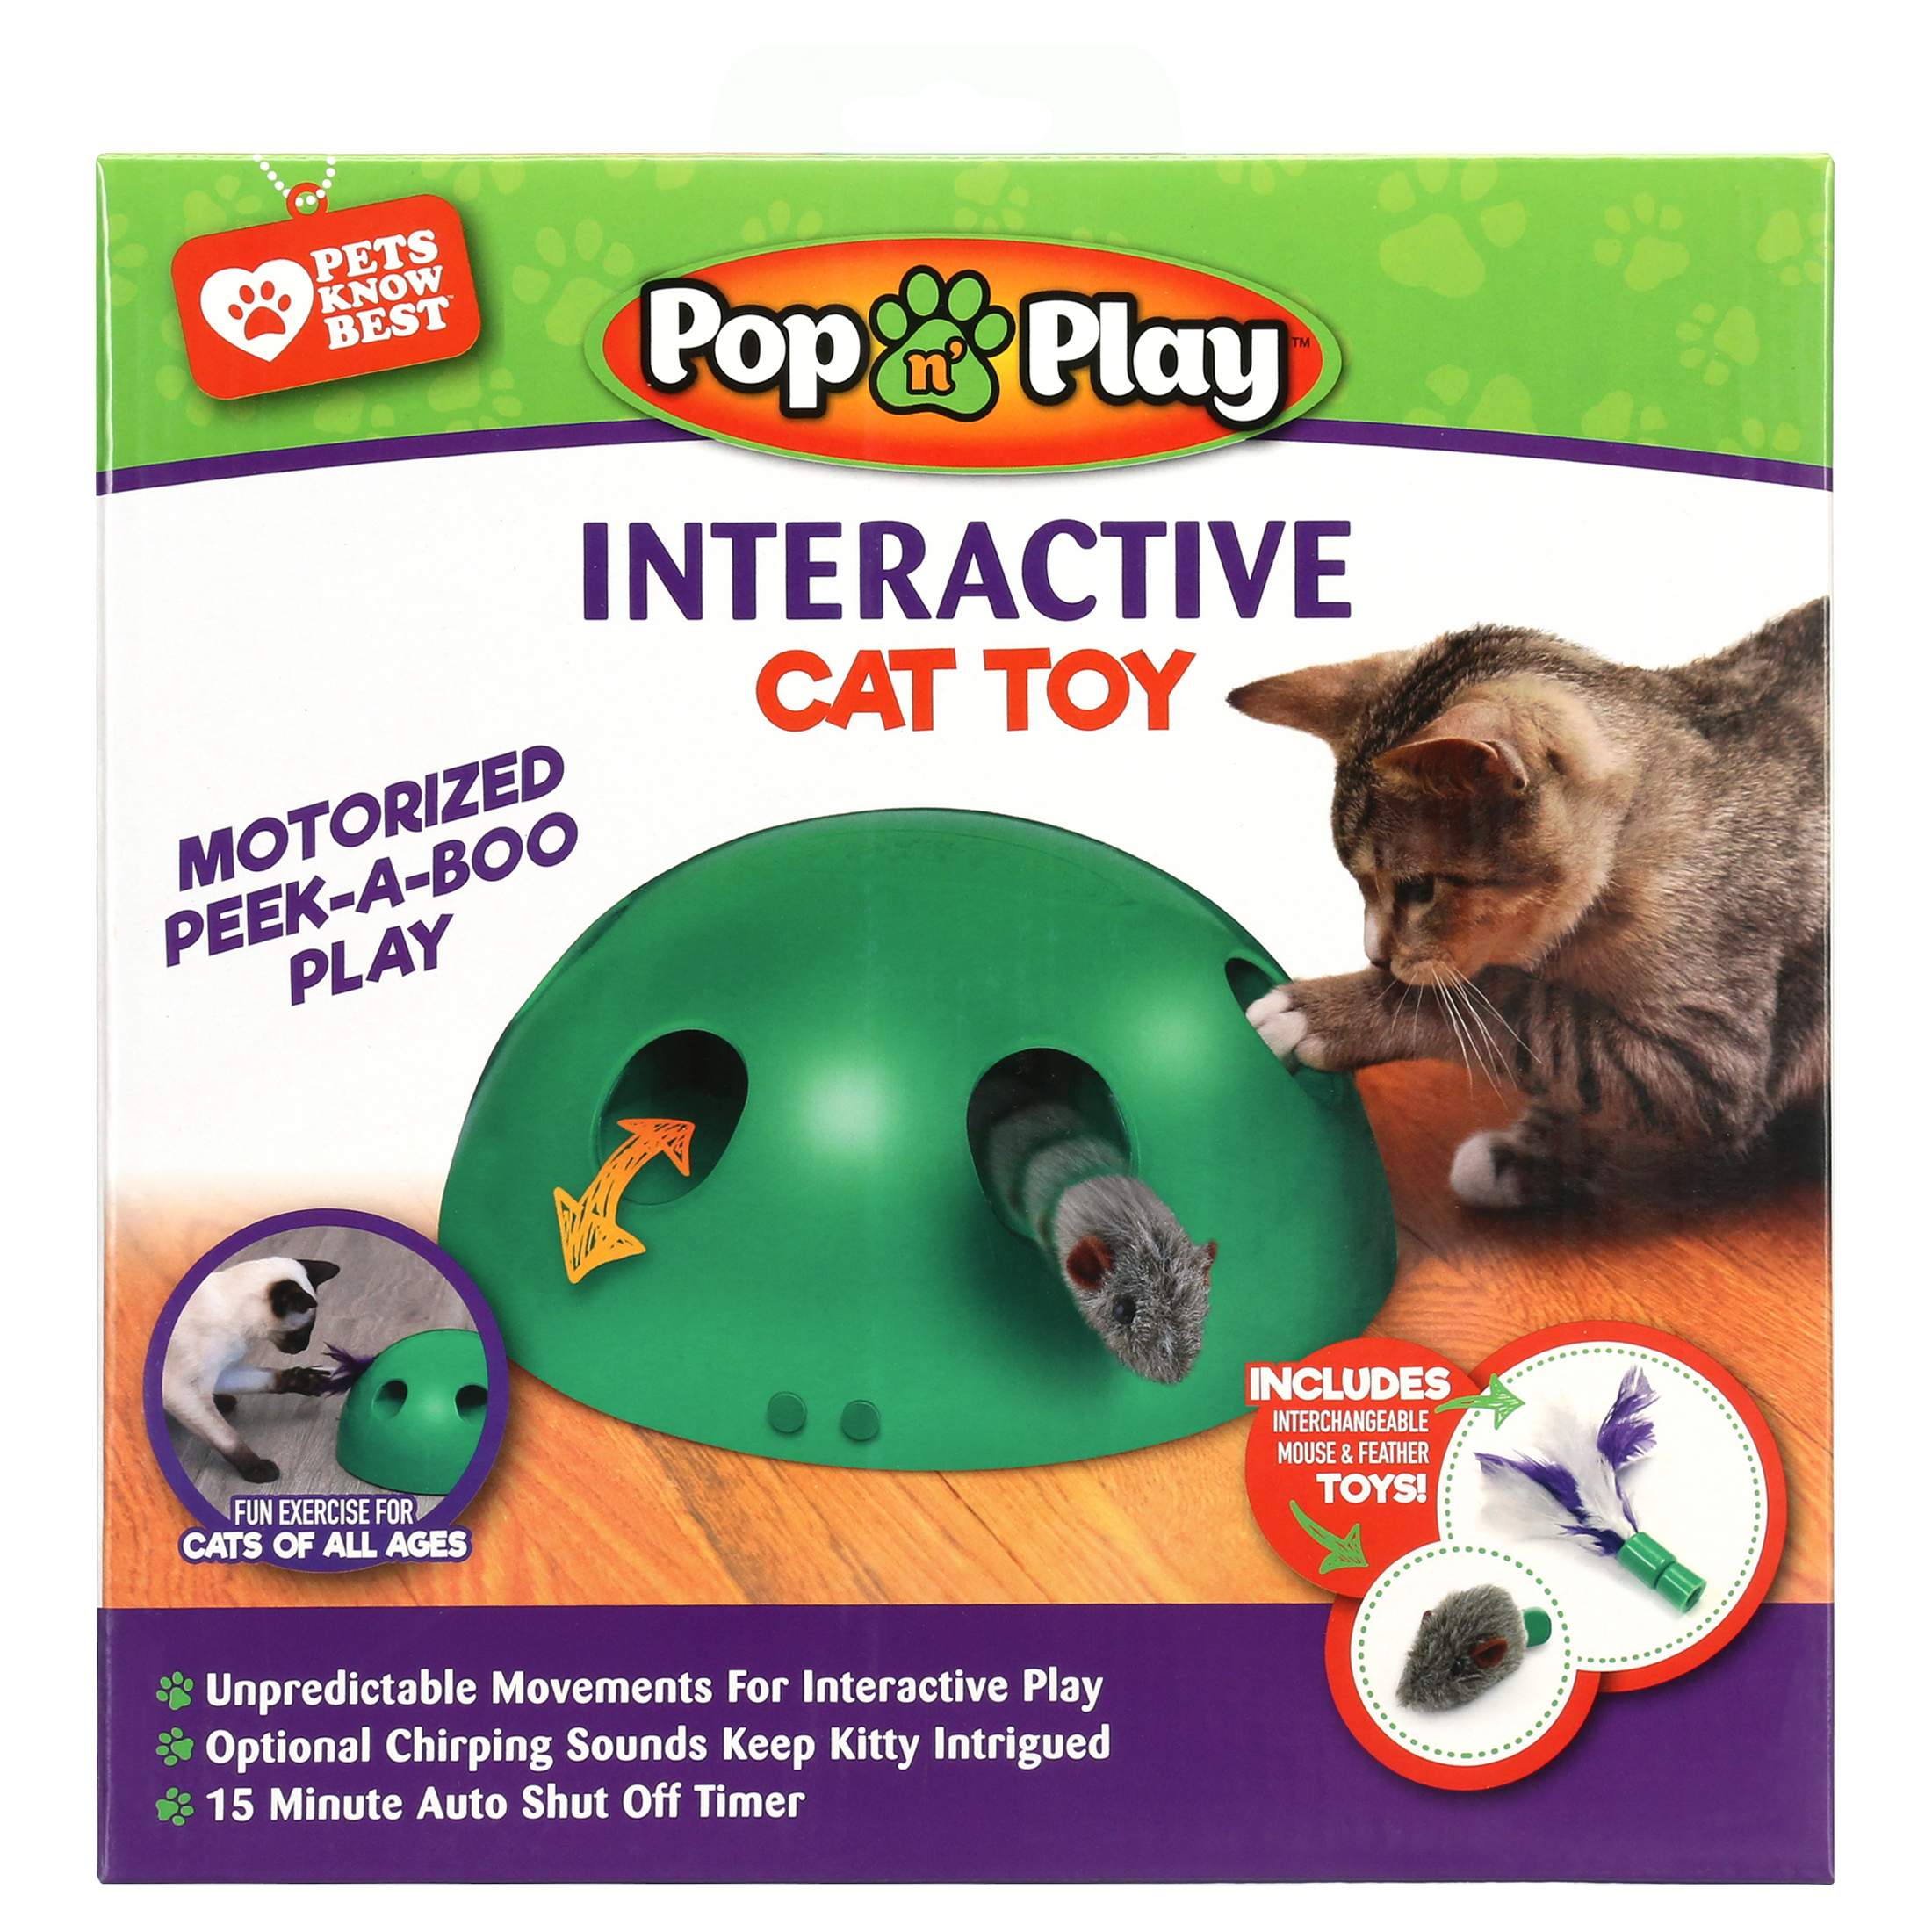 Green Cat Toy Peek-A-Boo Pets Know Best